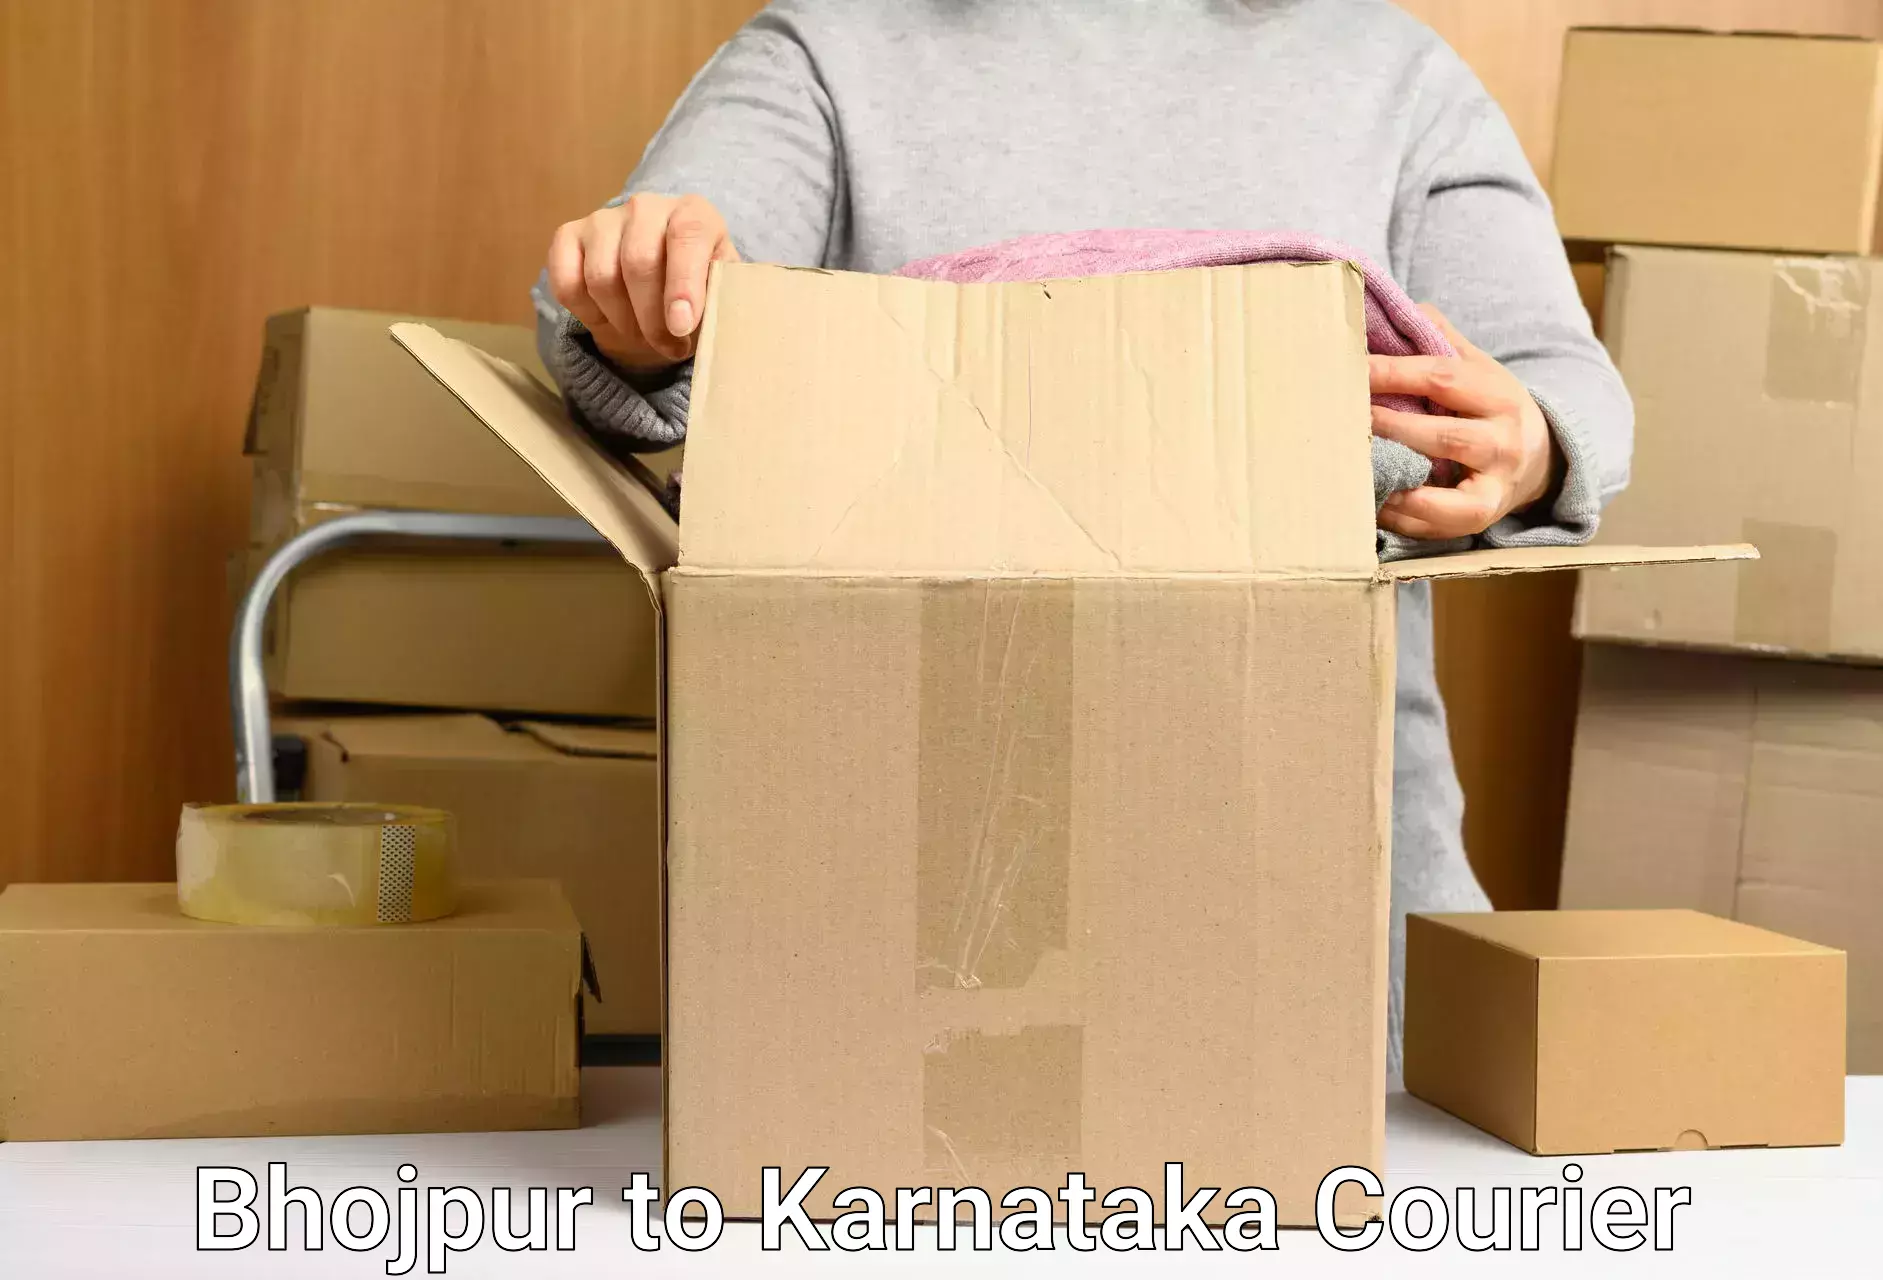 Quality courier services Bhojpur to Bijapur